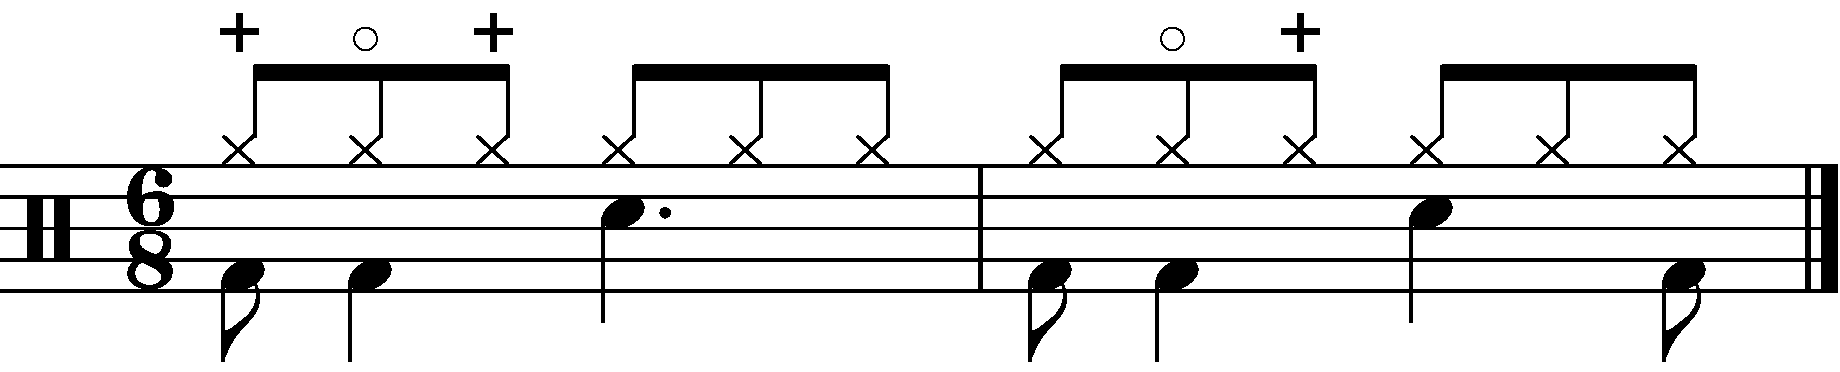 The Hi Hat Part for example 1 with groove added in